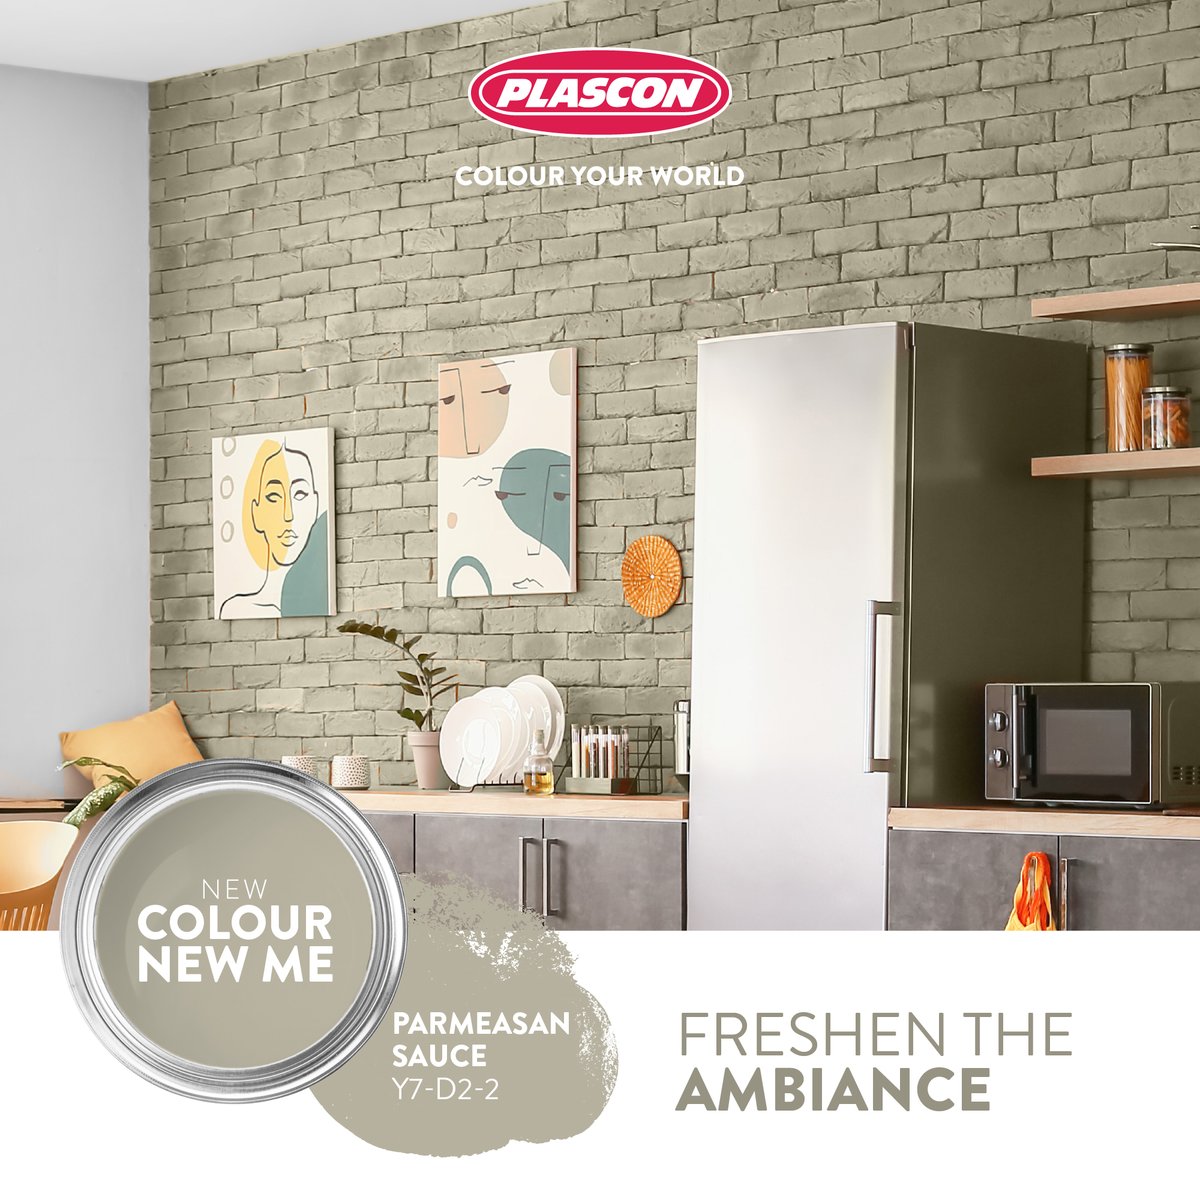 OUT with the old, in with the NEW: PARMESAN SAUCE adds spice to your kitchen, try it. Spot the code? #ColourYourWorld